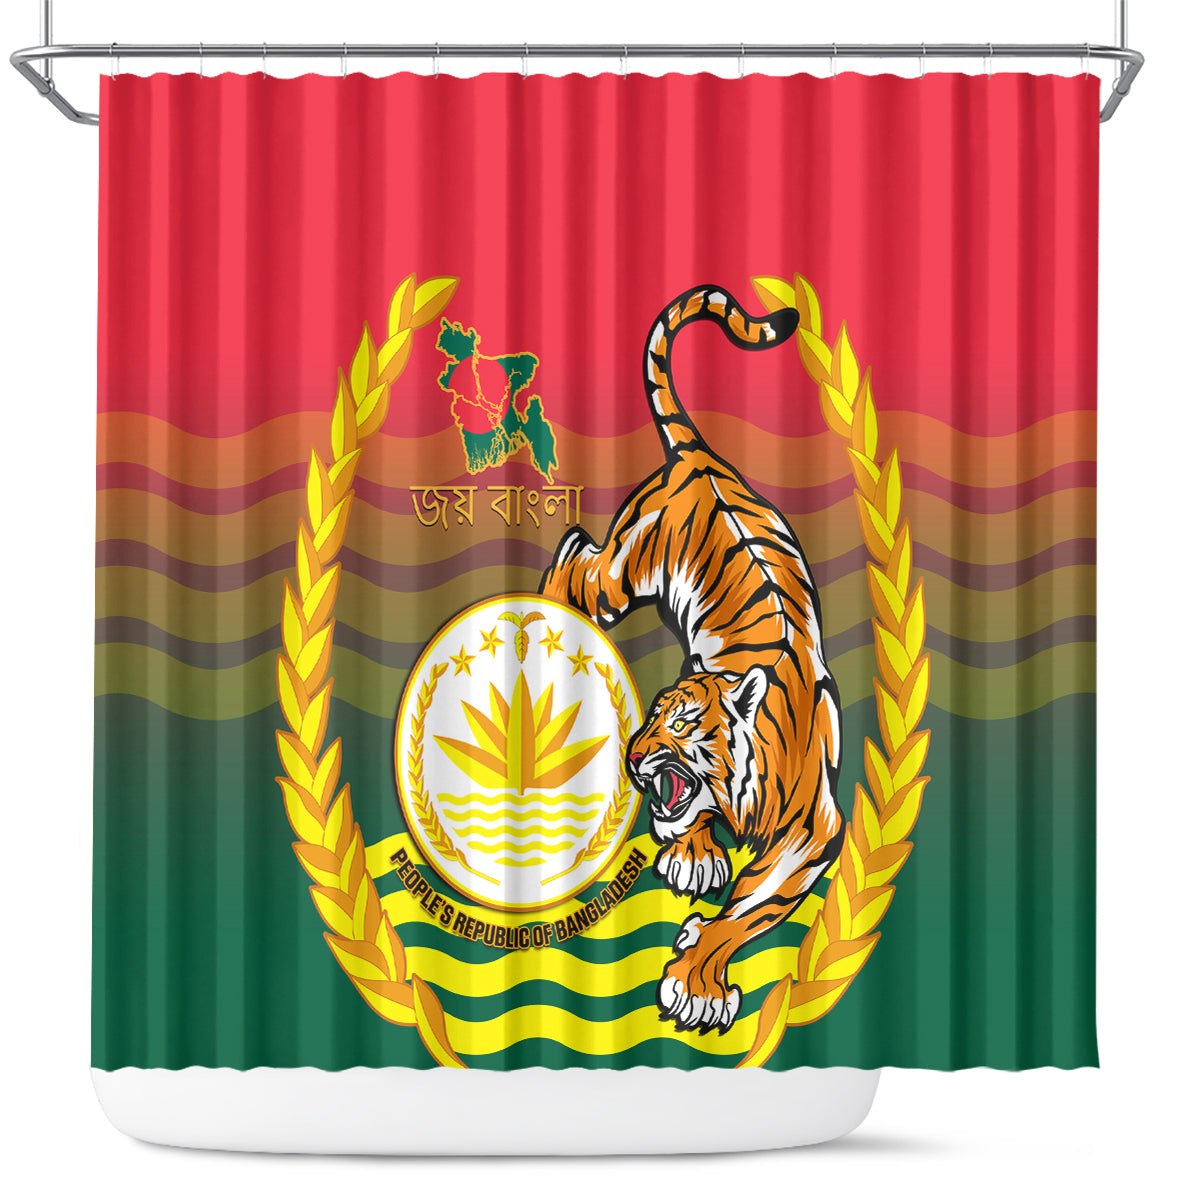 Bangladesh Independence Day Shower Curtain Royal Bengal Tiger With Coat Of Arms